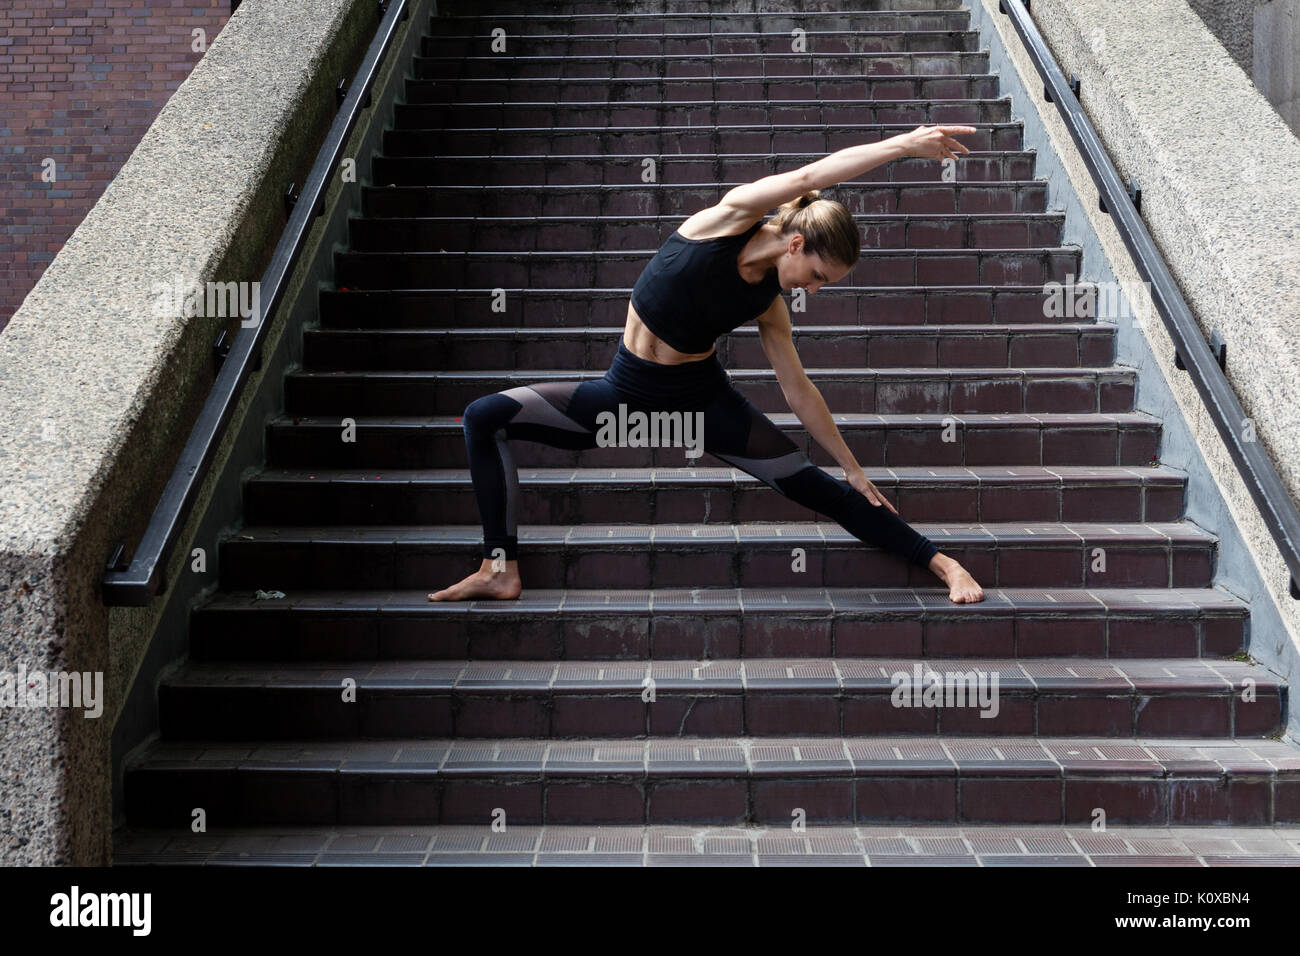 Yoga in the city of London - finding inner quiet amidst the busyness of the City Stock Photo